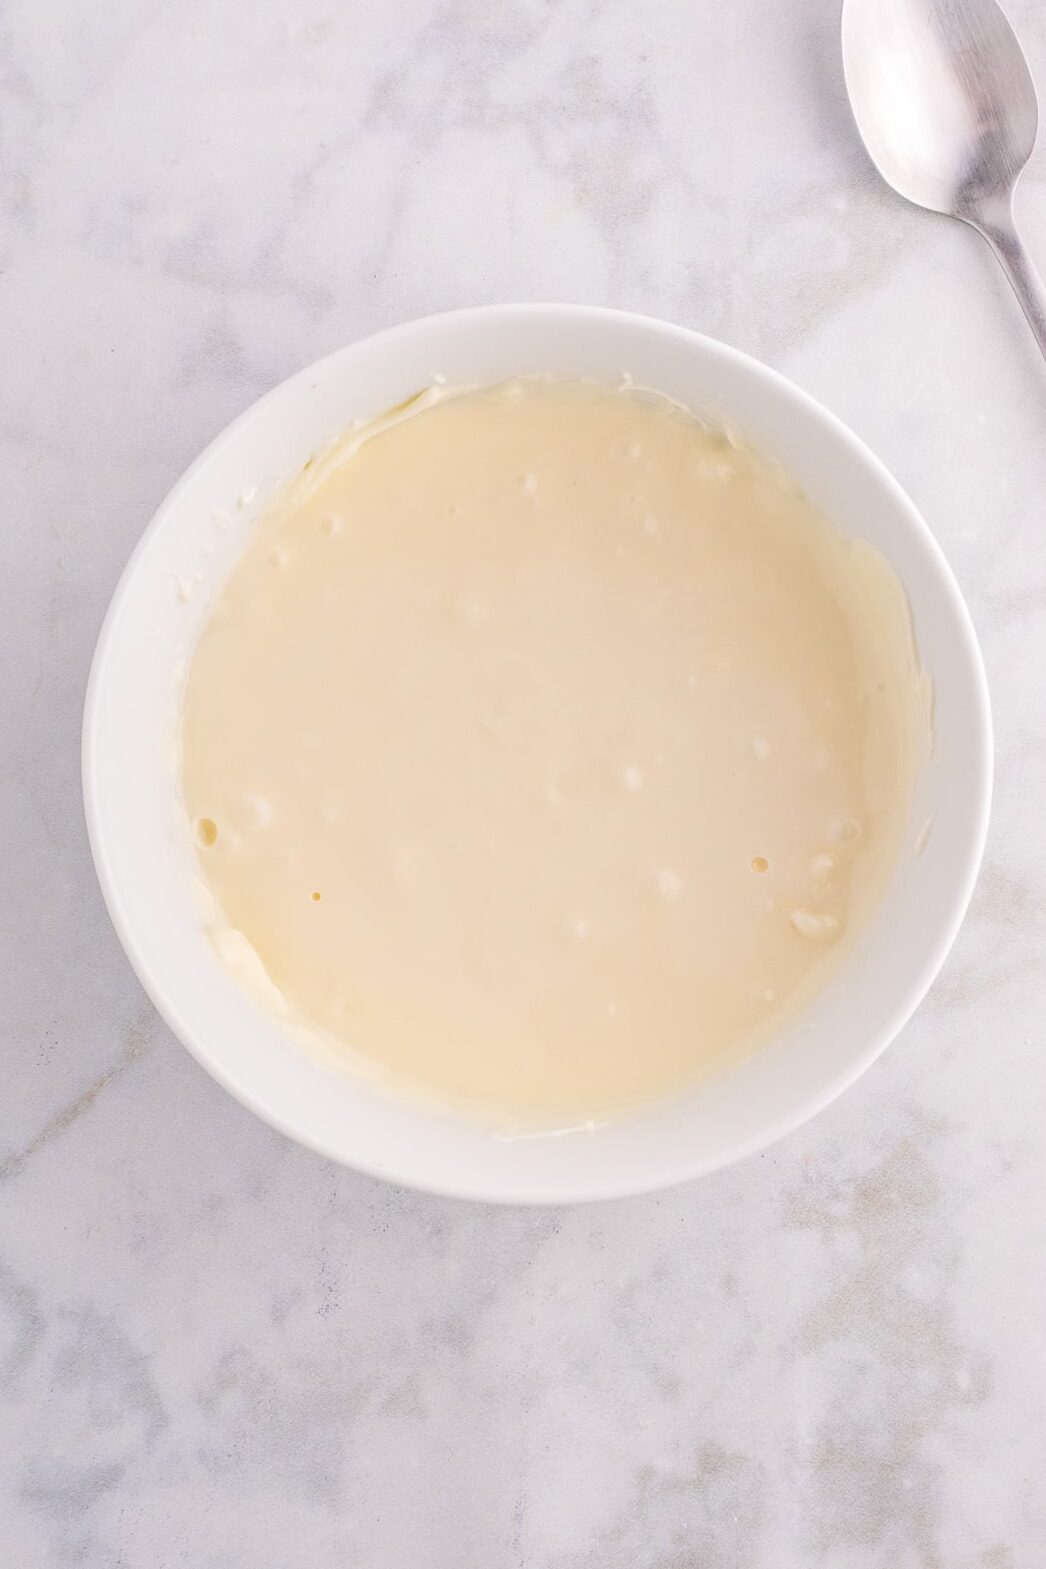 Melted white chocolate in a bowl.